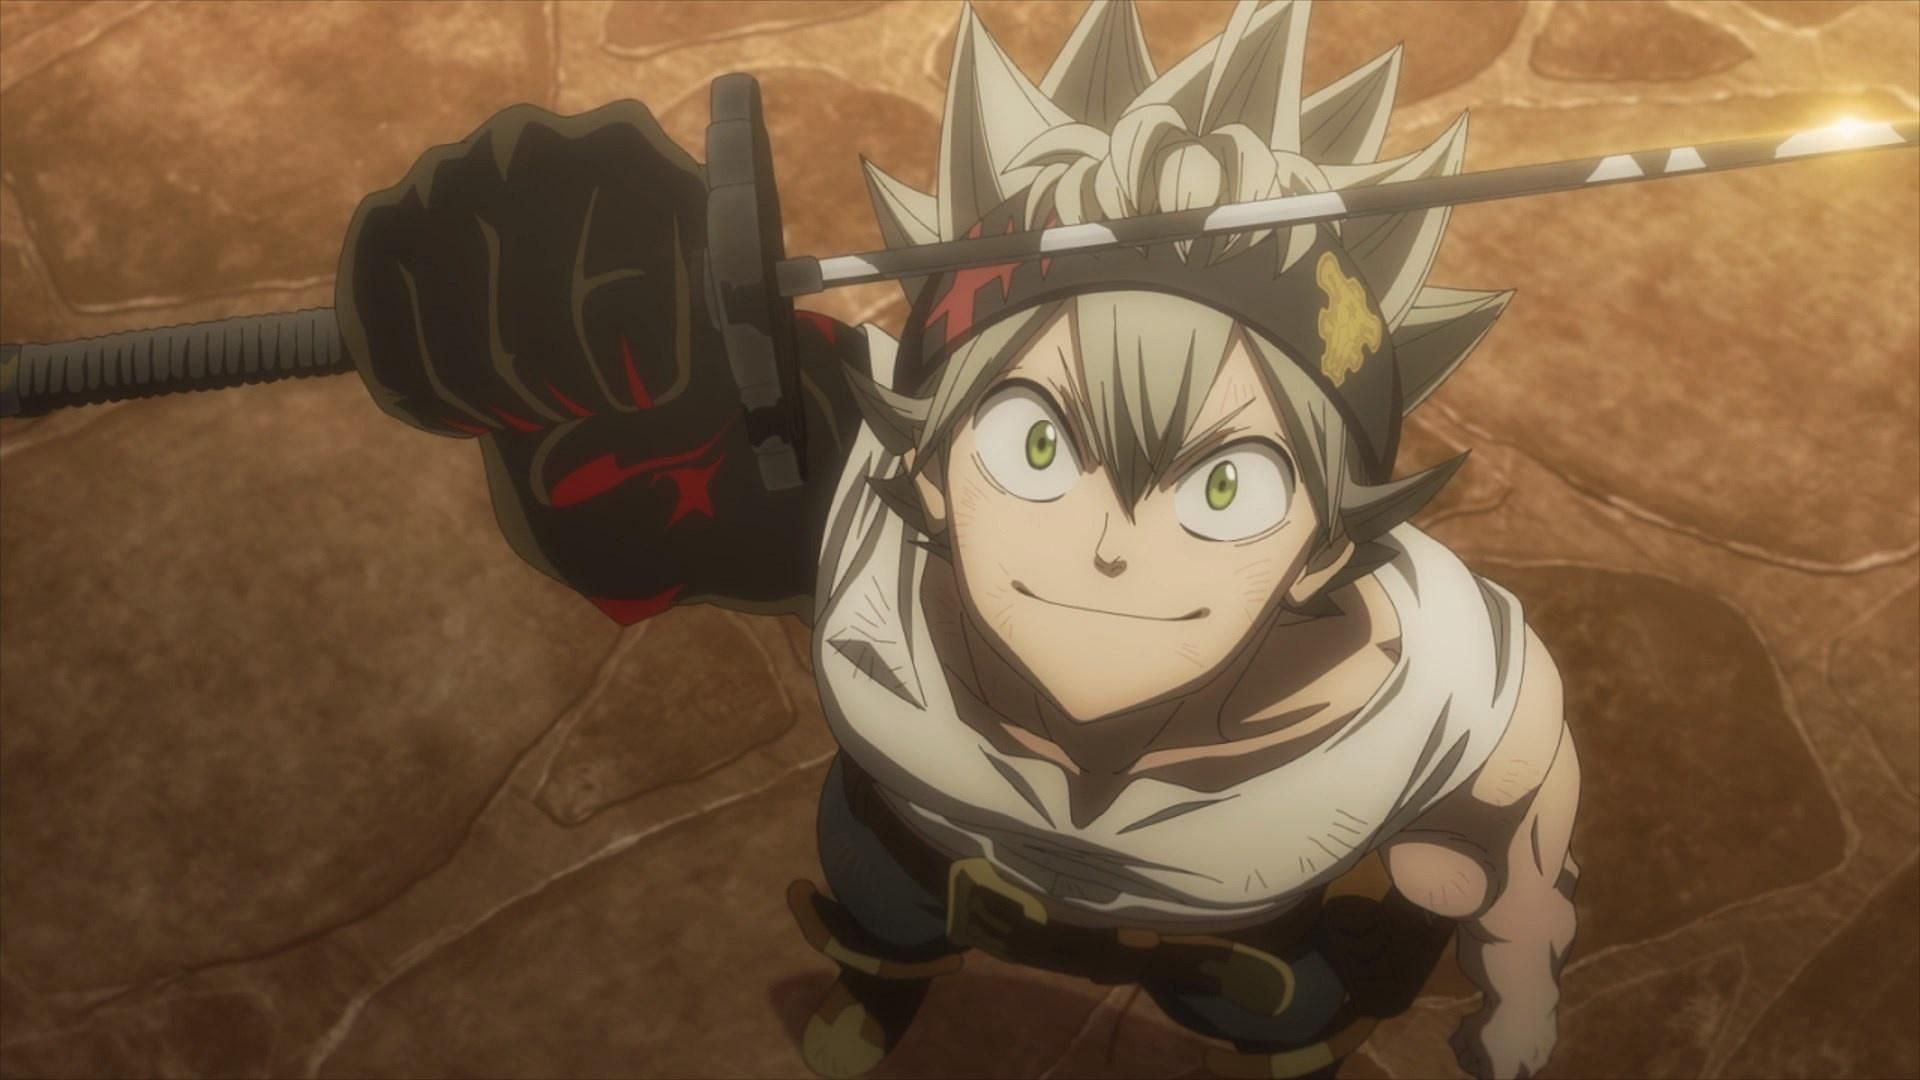 Black Clover Return From Hiatus Confirmed With A Release Date